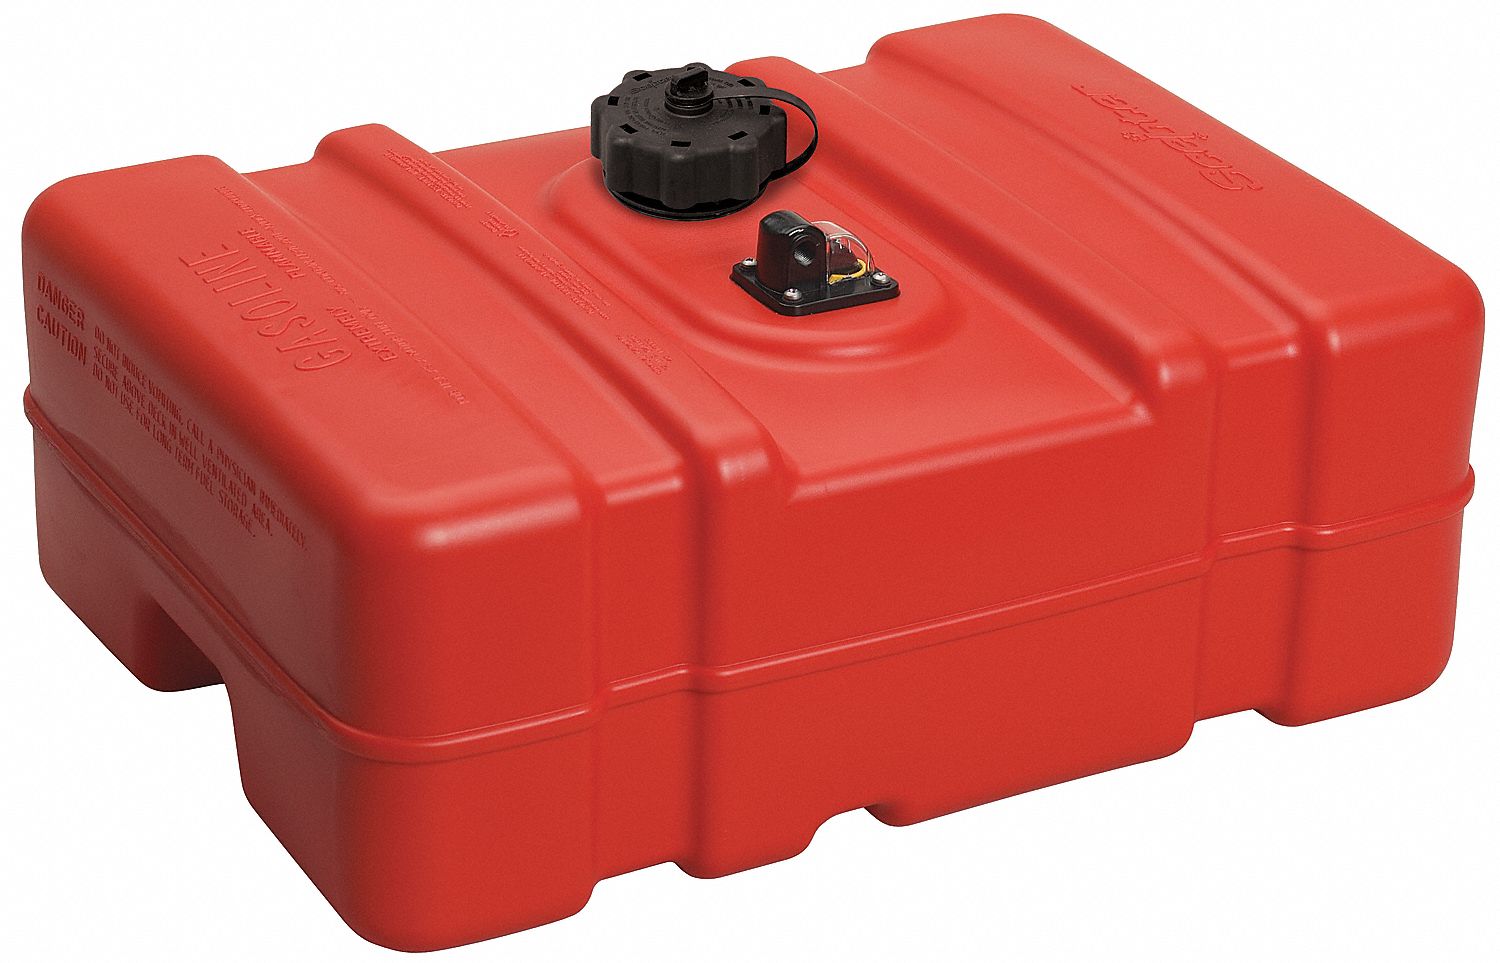 Portable Fuel Tank,  Red,  Plastic,  12 gal Capacity,  11.5 in Height,  18.1 in Width